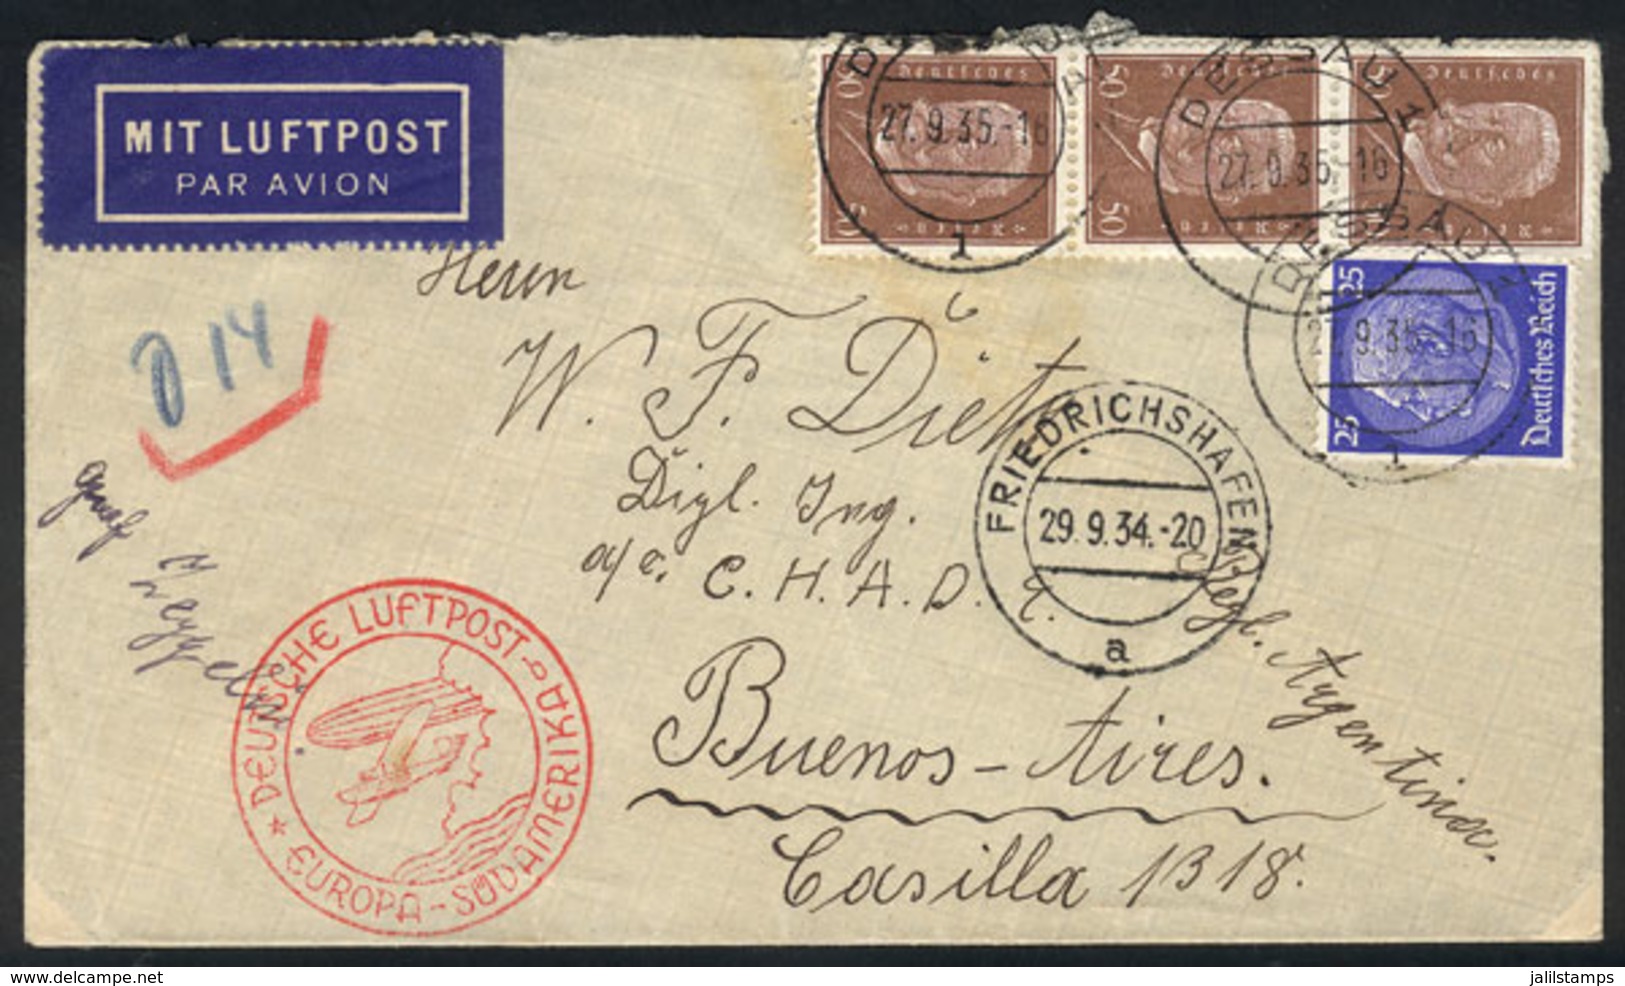 GERMANY: Airmail Cover Flown By ZEPPELIN, Sent From Dessau To Buenos Aires On 27/SE/1935, VF Quality! - Prefilatelia